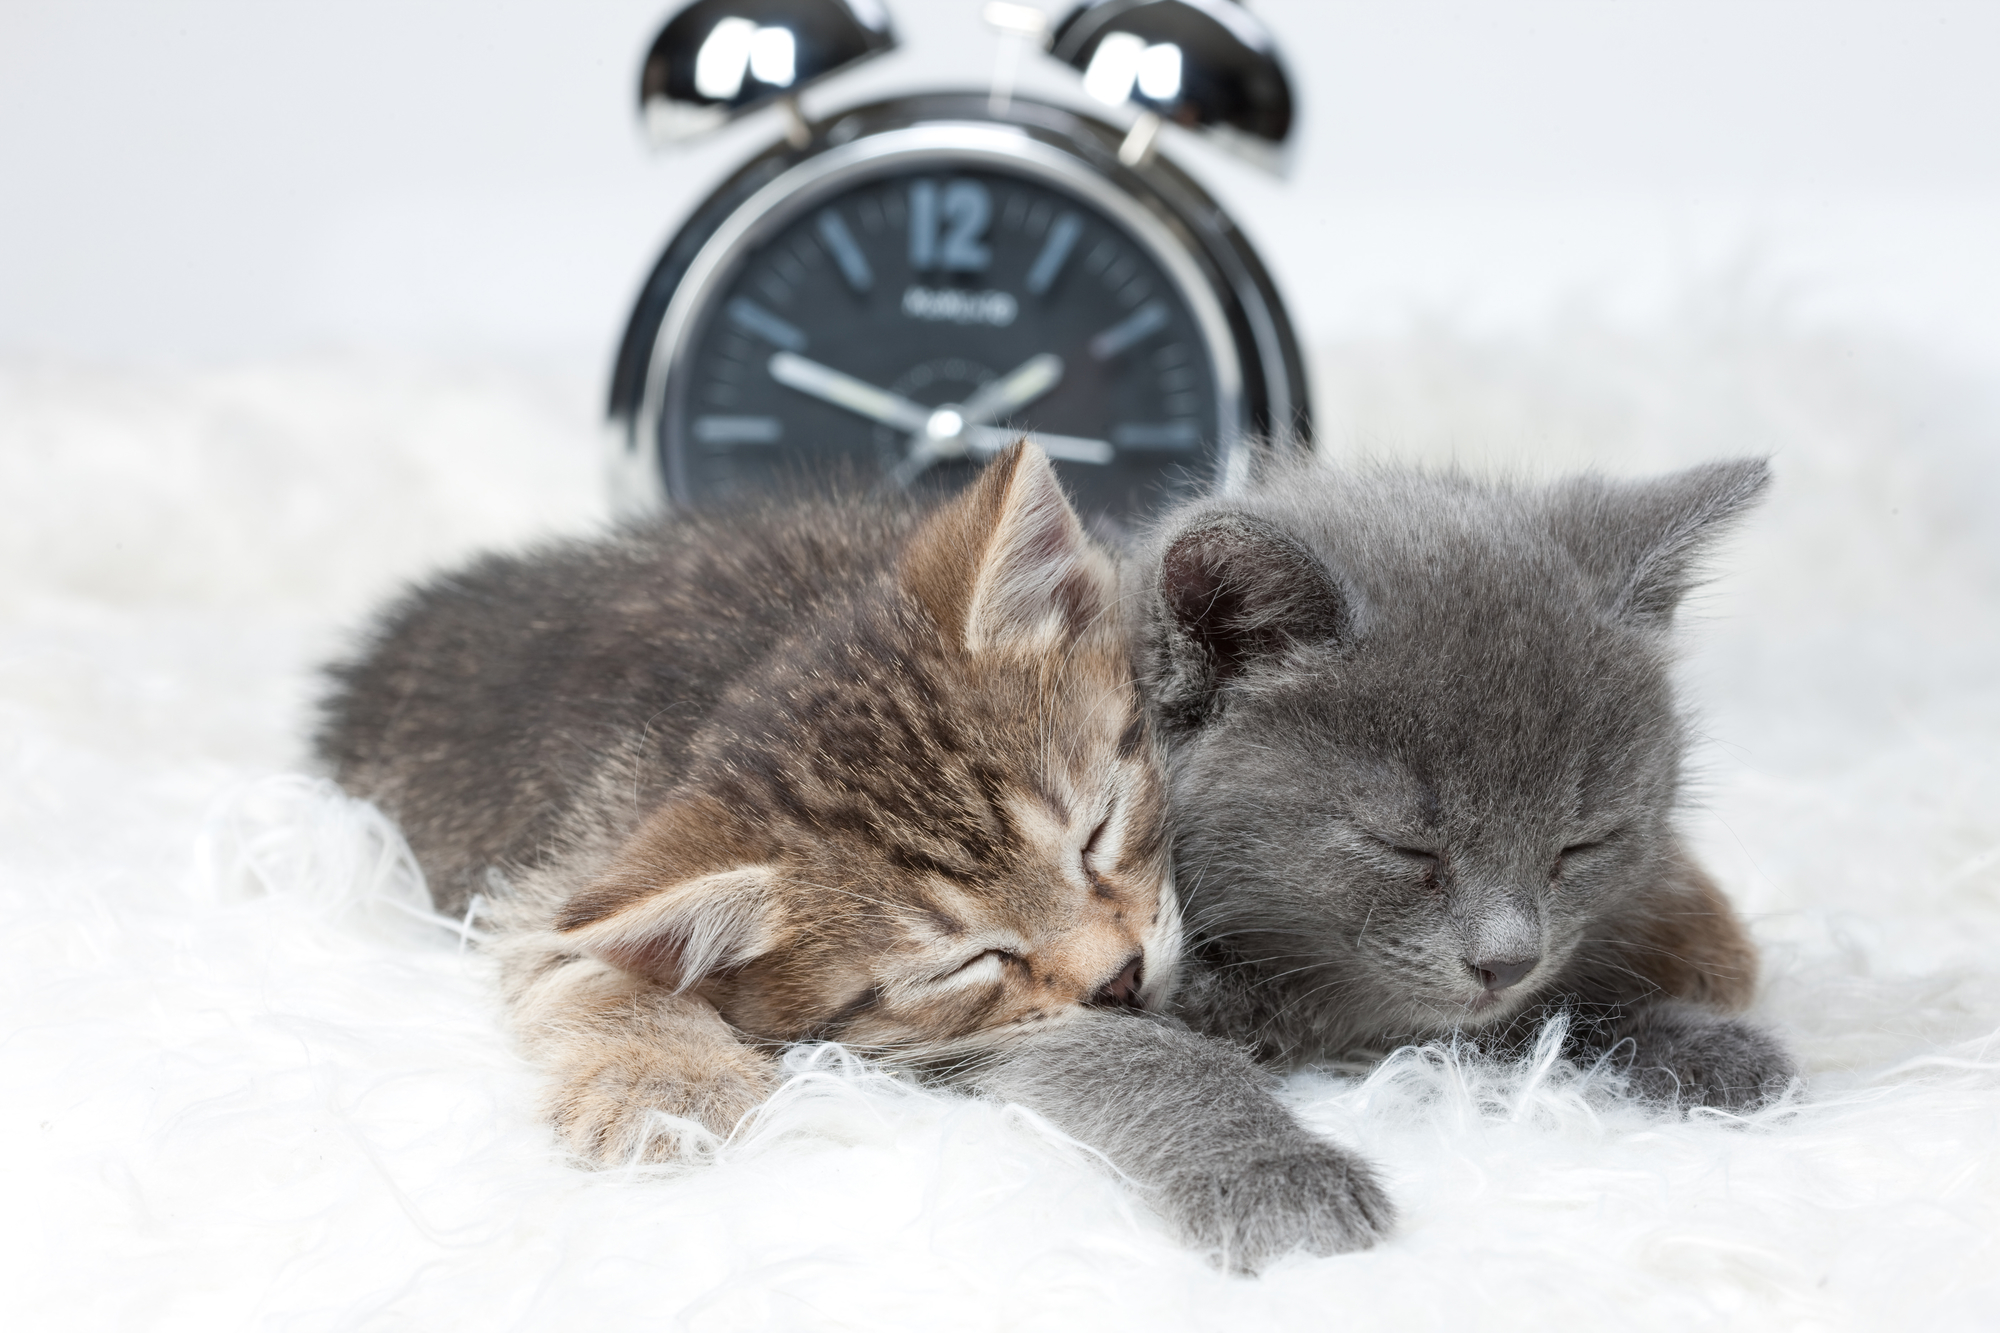 Cute Kittens with Clock